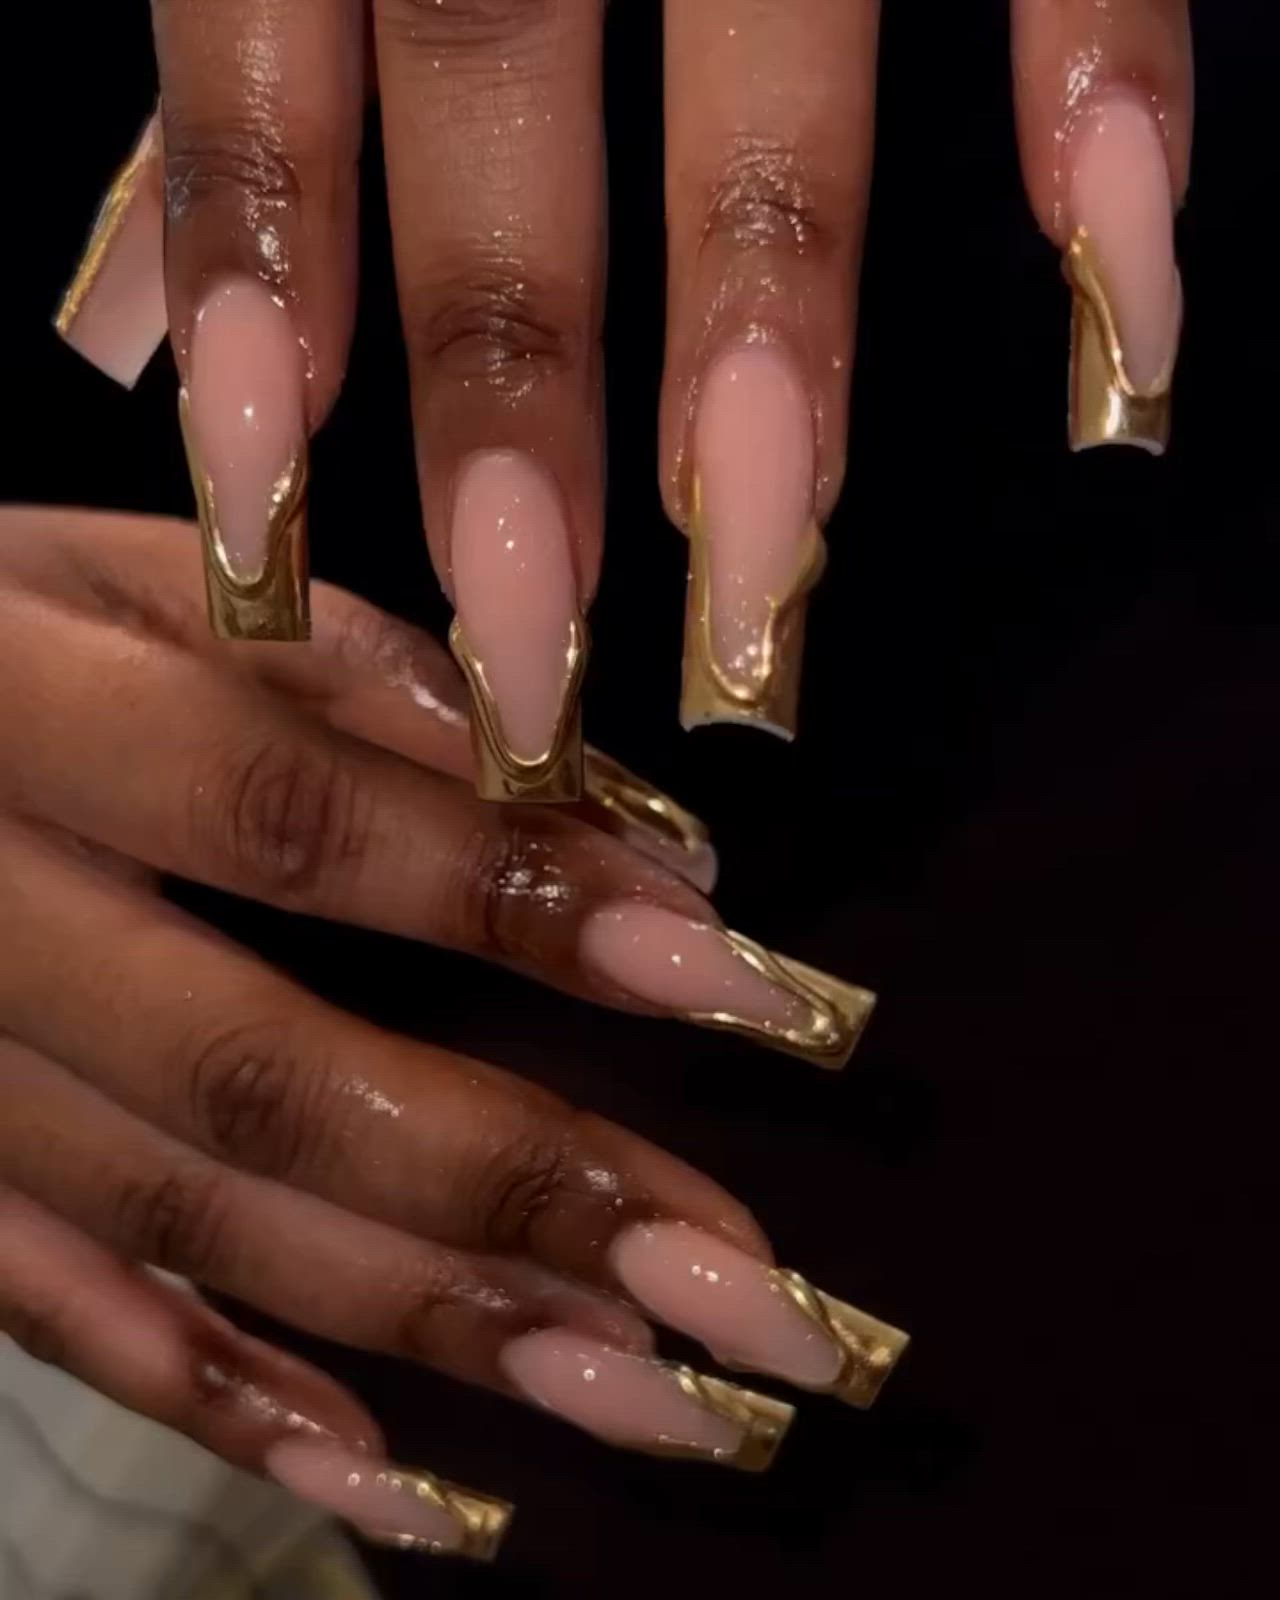 This contains an image of: beautiful nail inspo 😍😍🥰